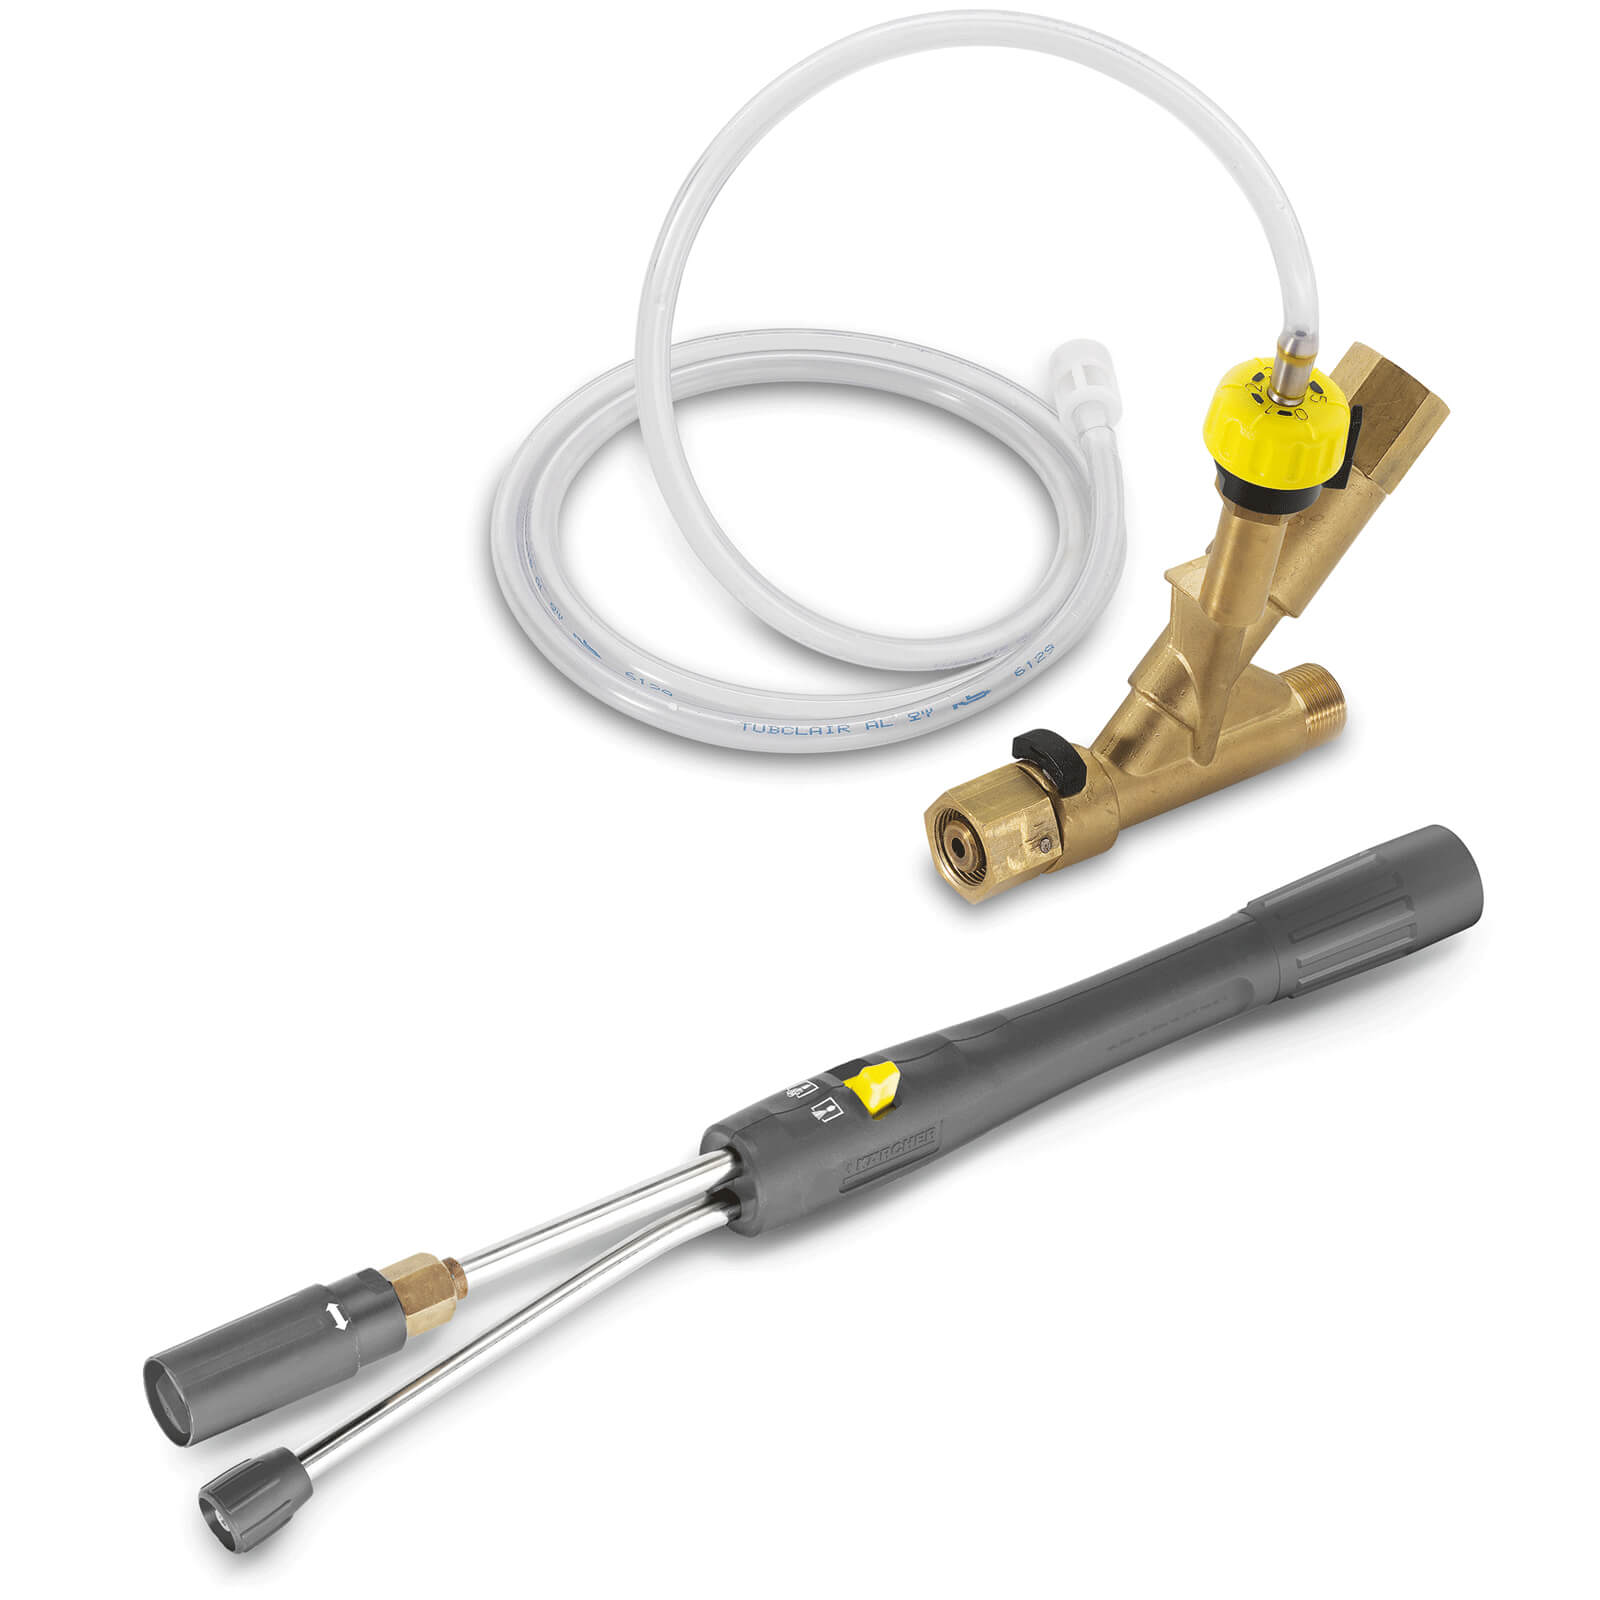 Karcher Inno Foam and Rinse Spray Kit with Detergent Injector for HD and XPERT Pressure Washers (Easy!Lock)